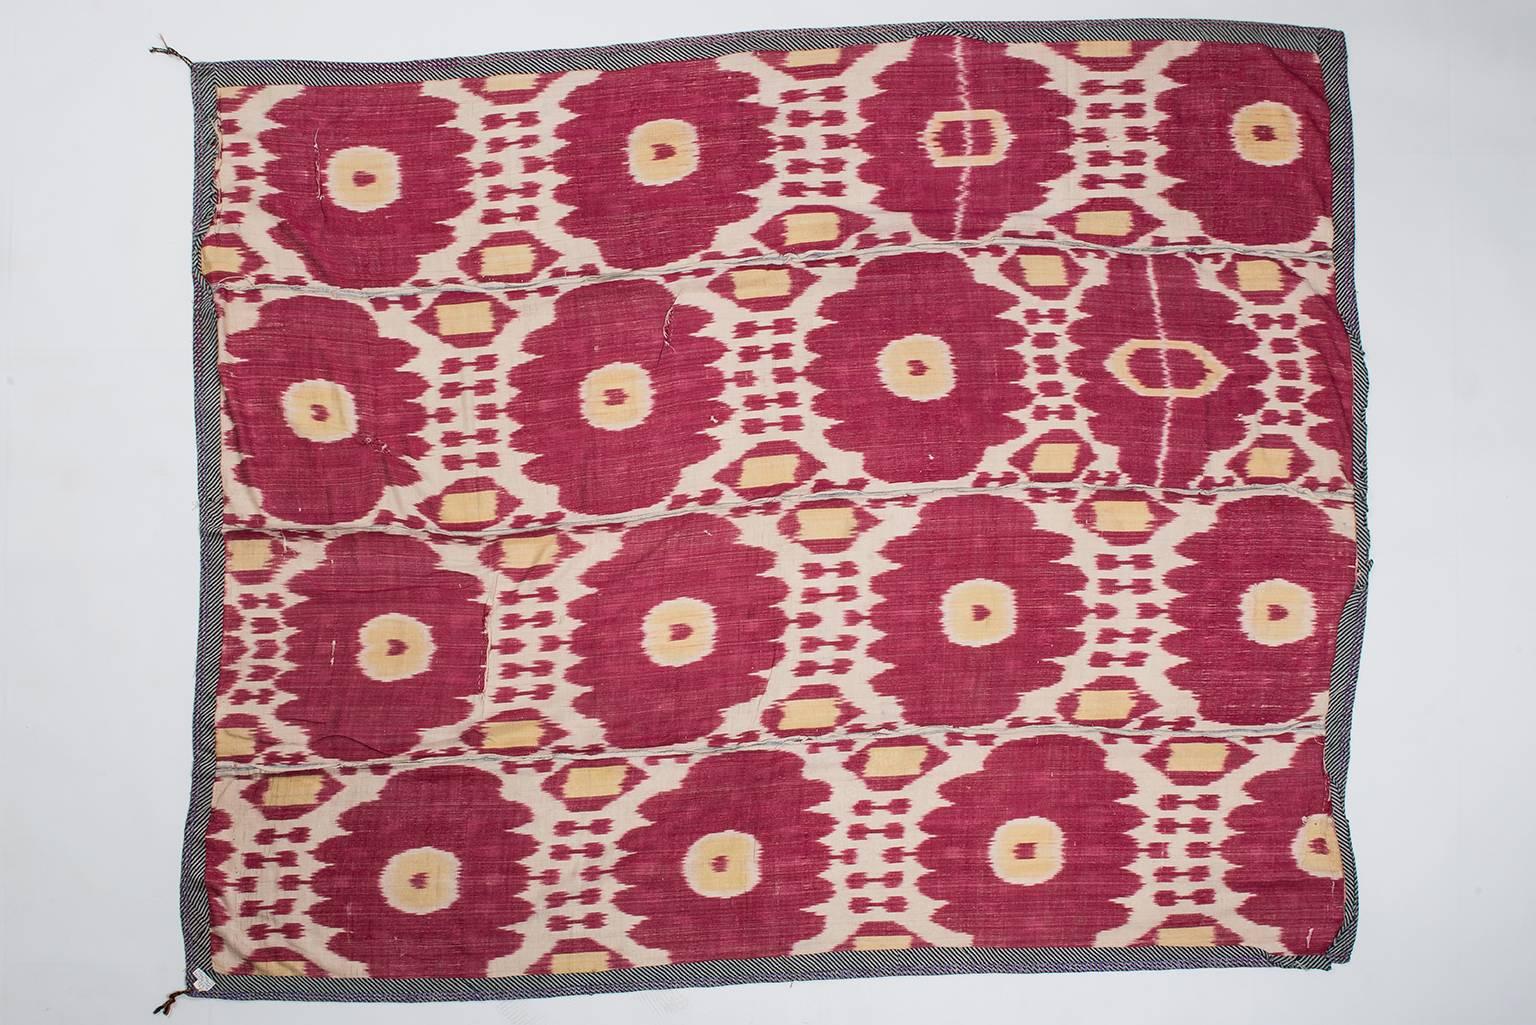 B/278. Turkoman antique Bokara ikat panel.
The process of Ikat weaving is fascinating because each silk thread is dyed before weaving.
There are topic specific books.